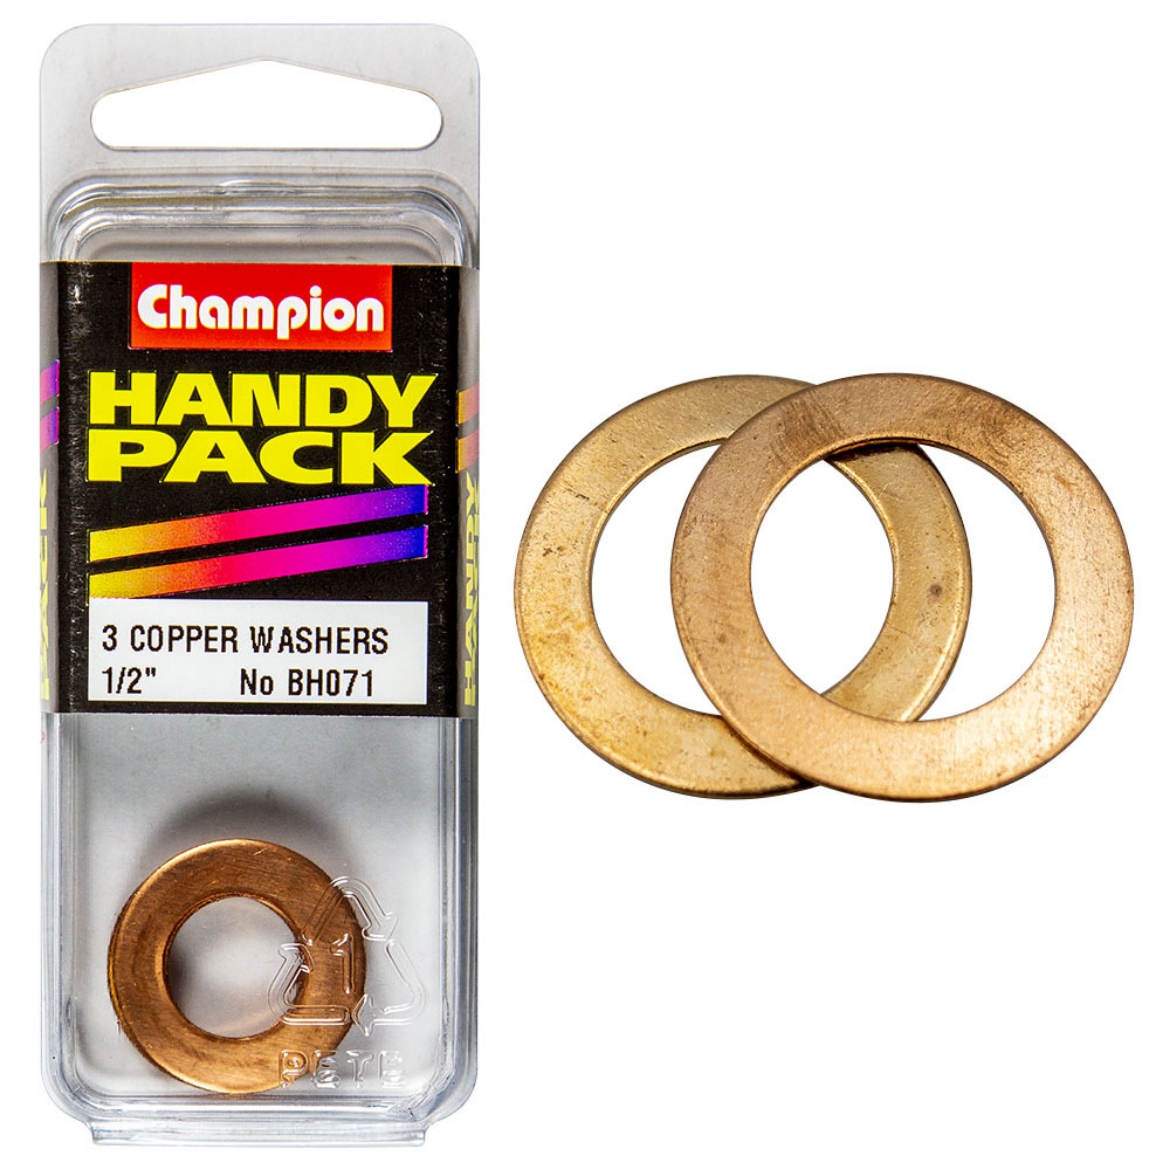 Picture of Handy Pk Copper Washers 20g 1/2x7/8 CWC (Pkt.3)